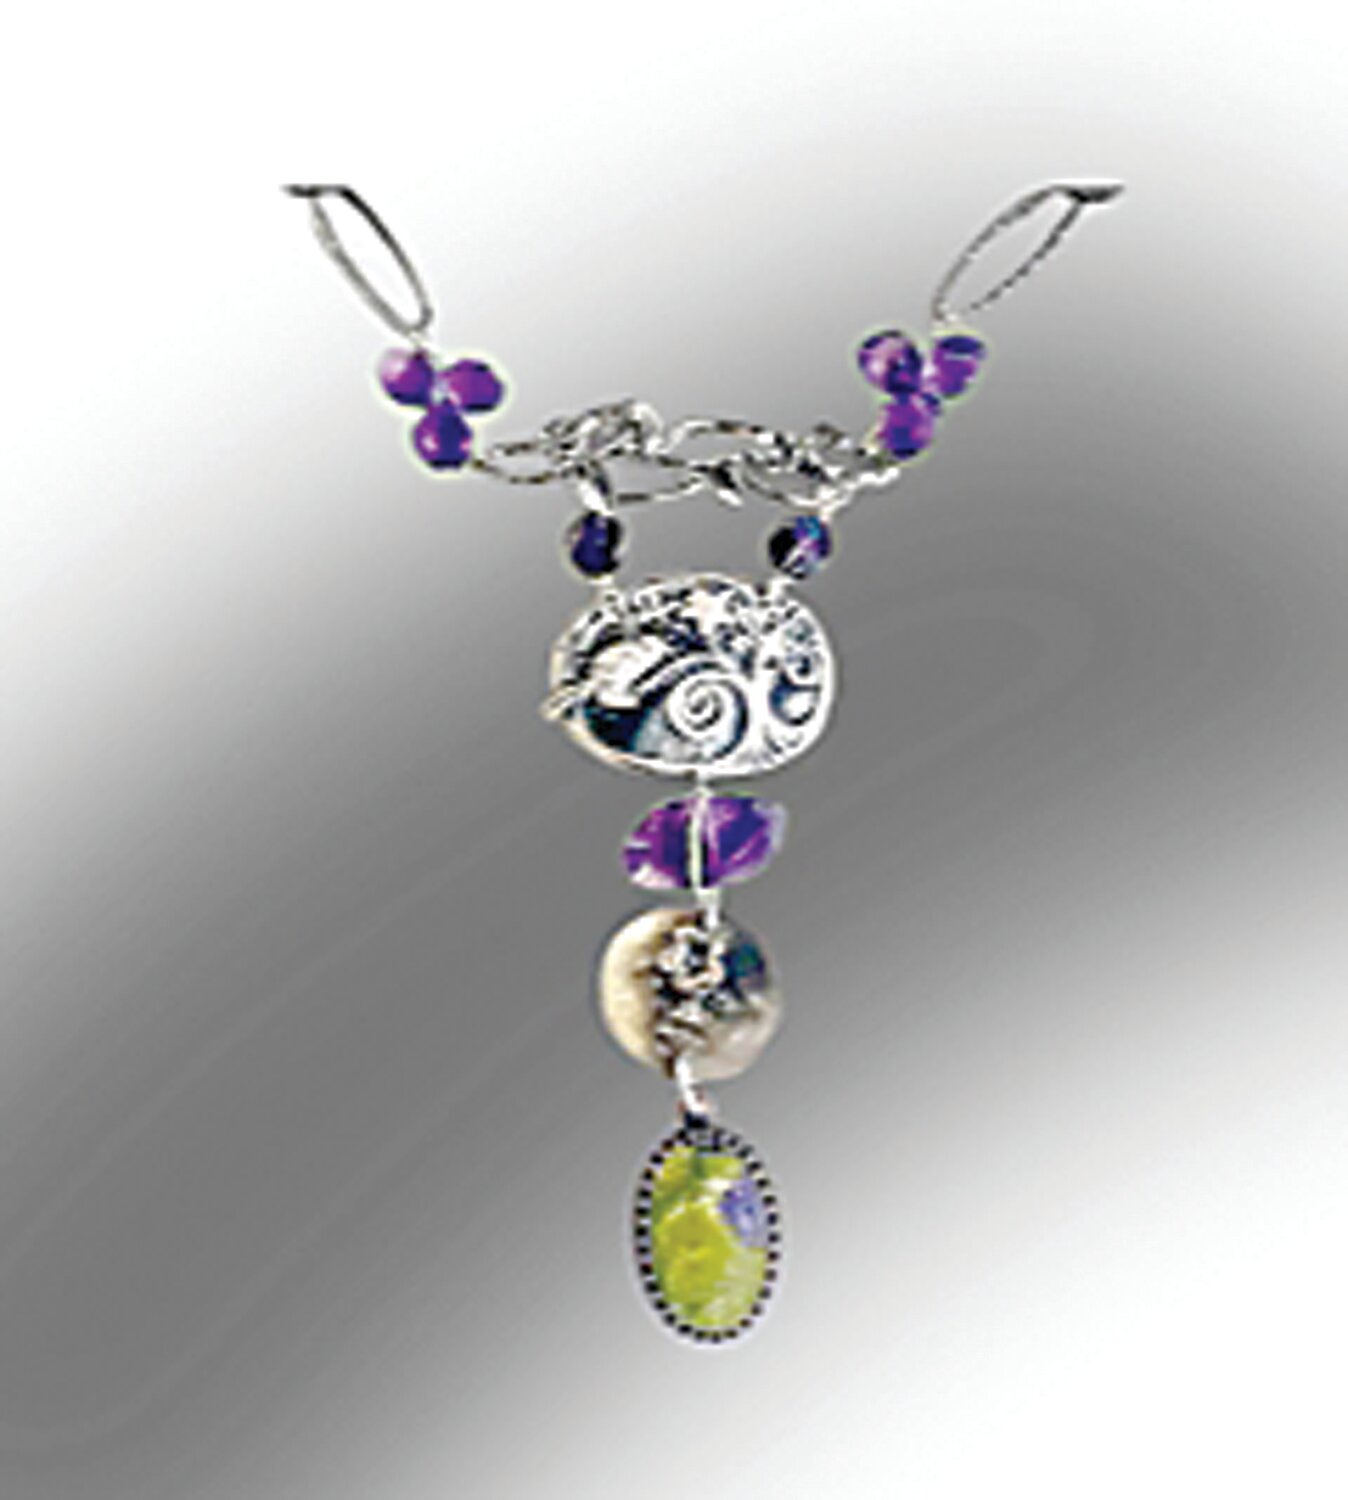 A necklace by Diana Contine.